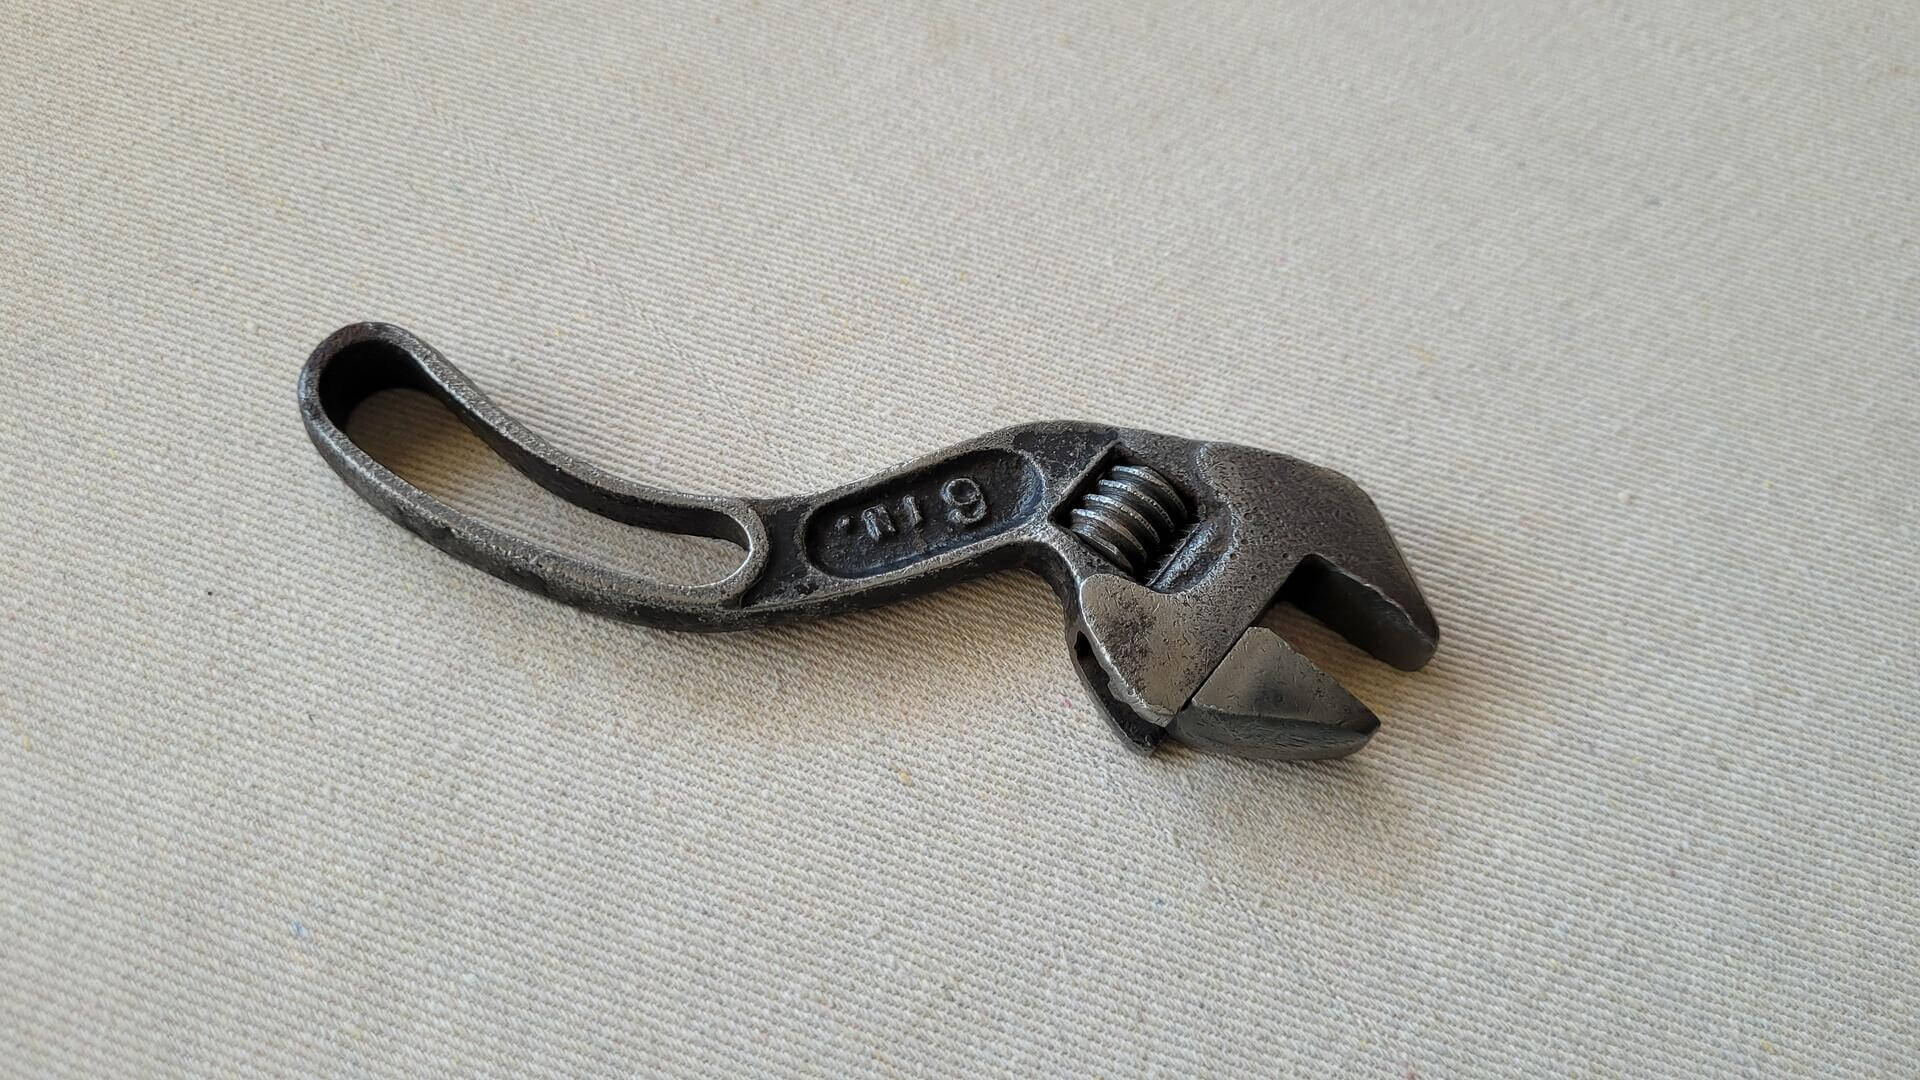 Vintage Bemis & Call Company adjustable S curved wrench 6 inches long. Vintage made in USA collectible automotive and machinist hand tools